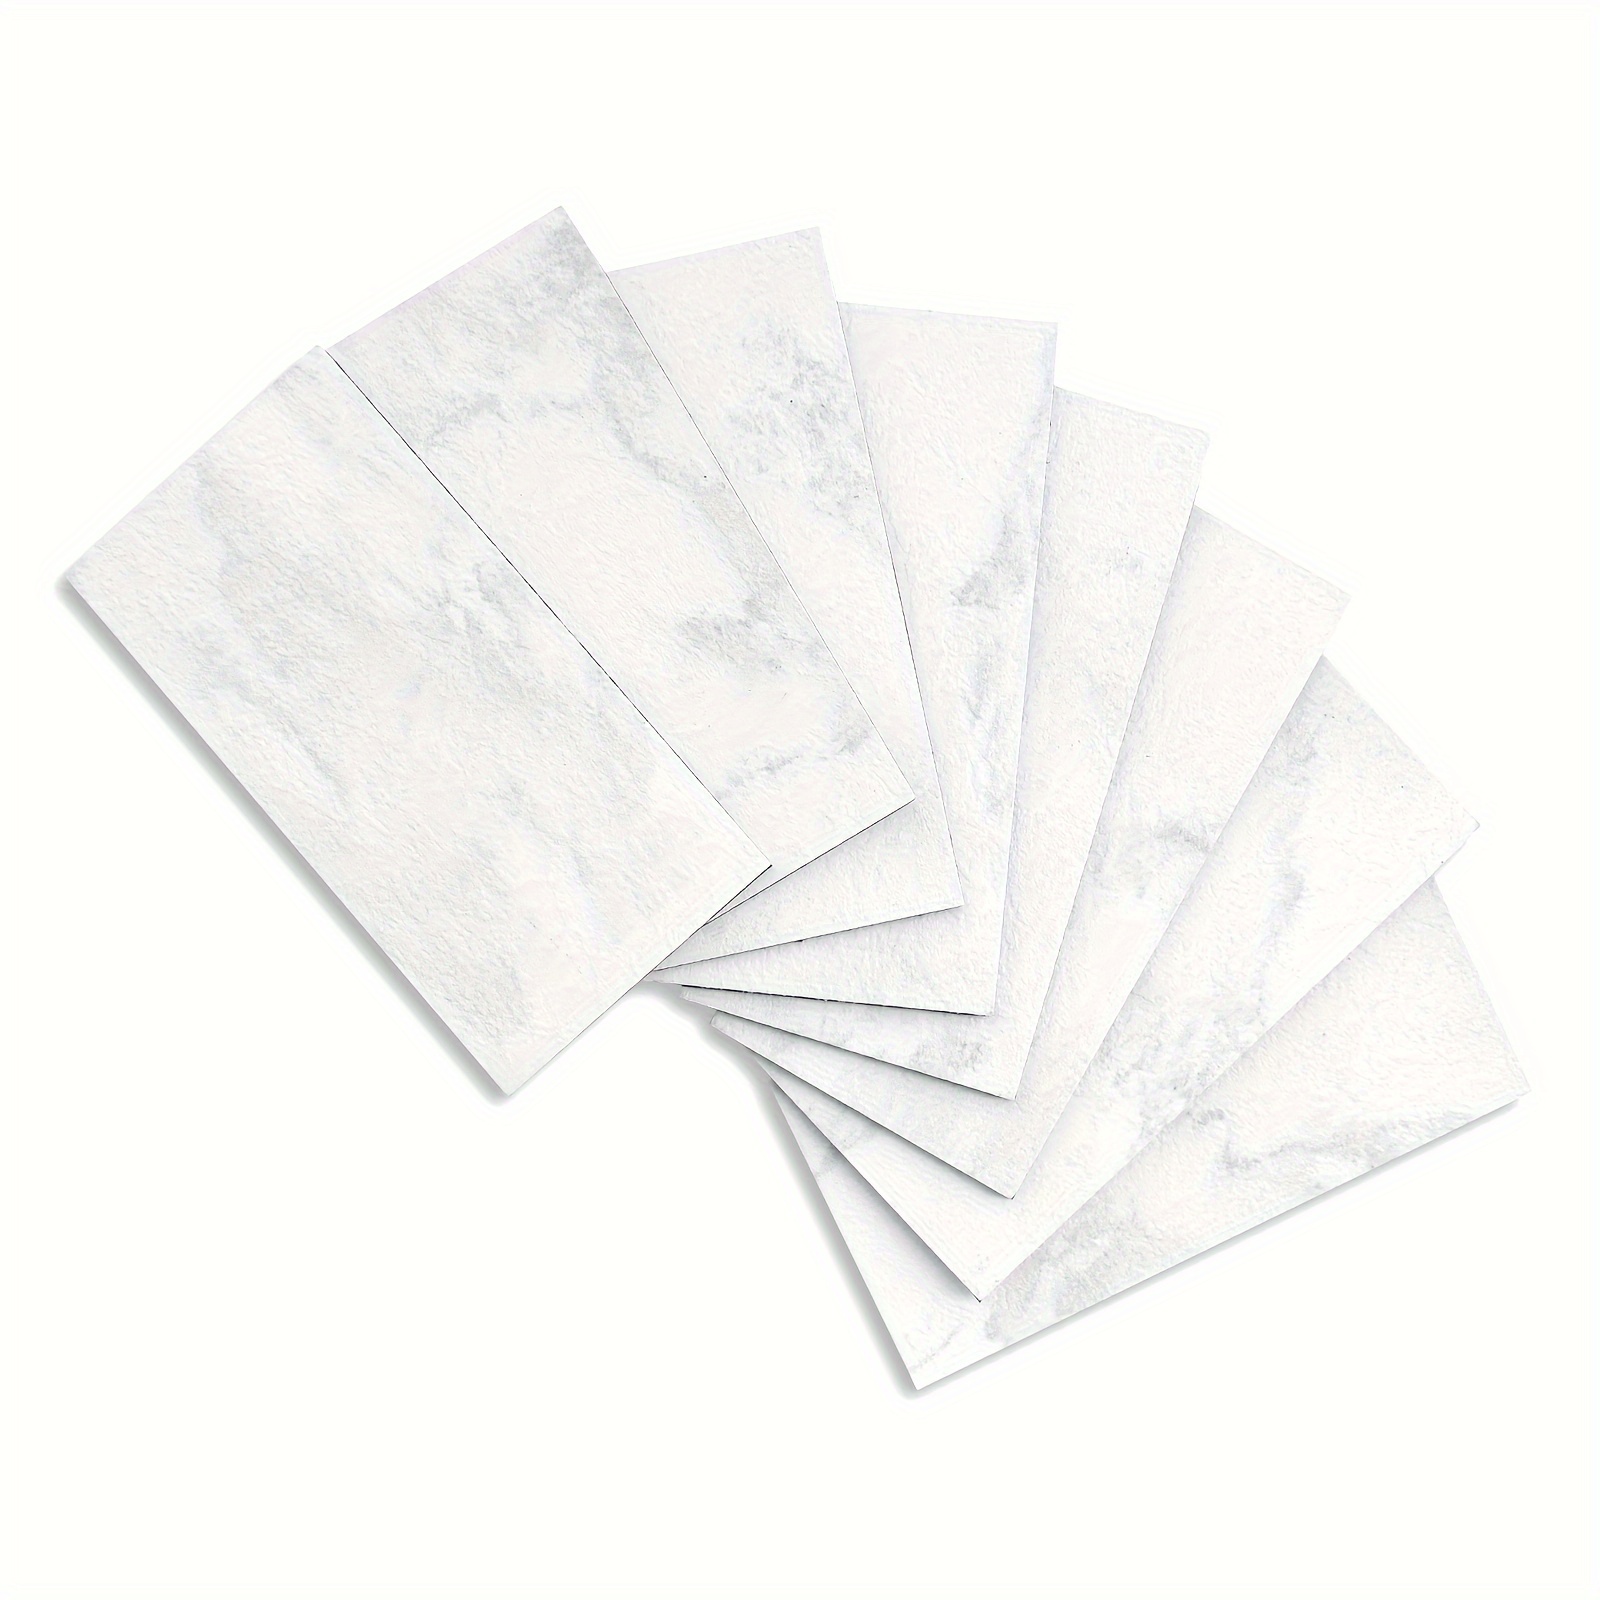 

100 Sheets Peel And Stick Backsplash 3 X 6 Inches 3d Pvc Composite Wall Tile Stick On Backsplash Tile For Kitchen Bathroom, Laundry Room, Fireplace In Bright Kara White Stone